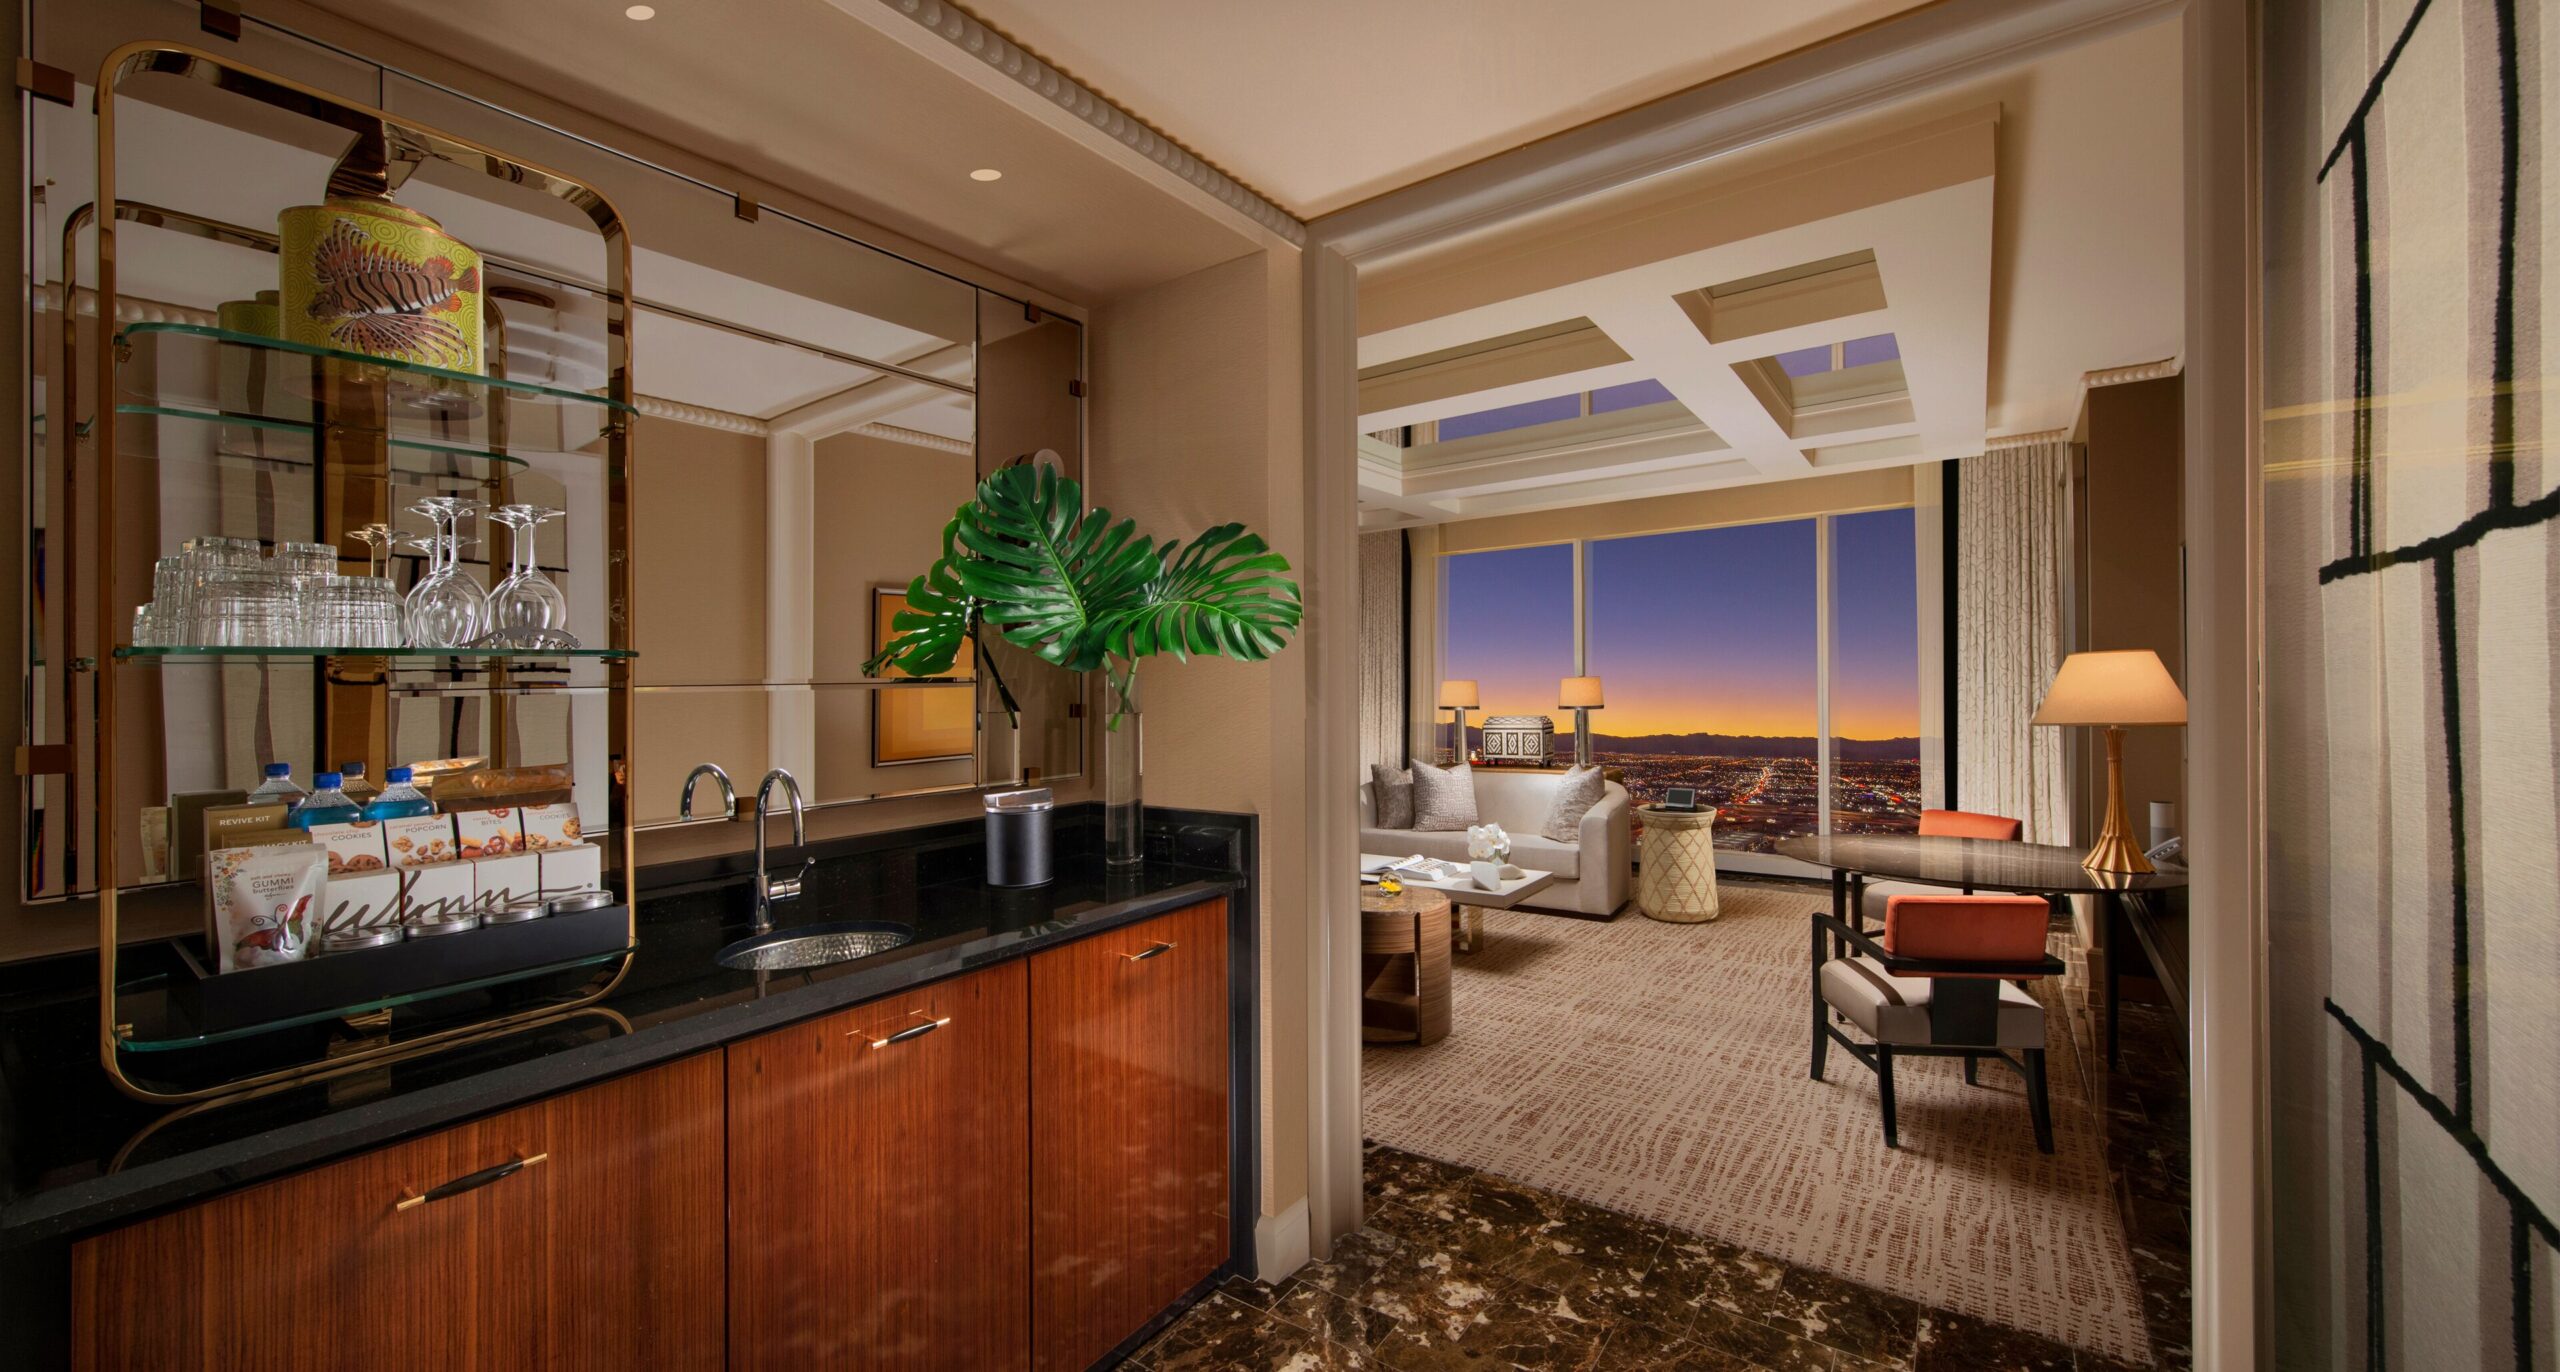 Encore at Wynn Las Vegas: A Luxurious Haven in the Heart of Sin City